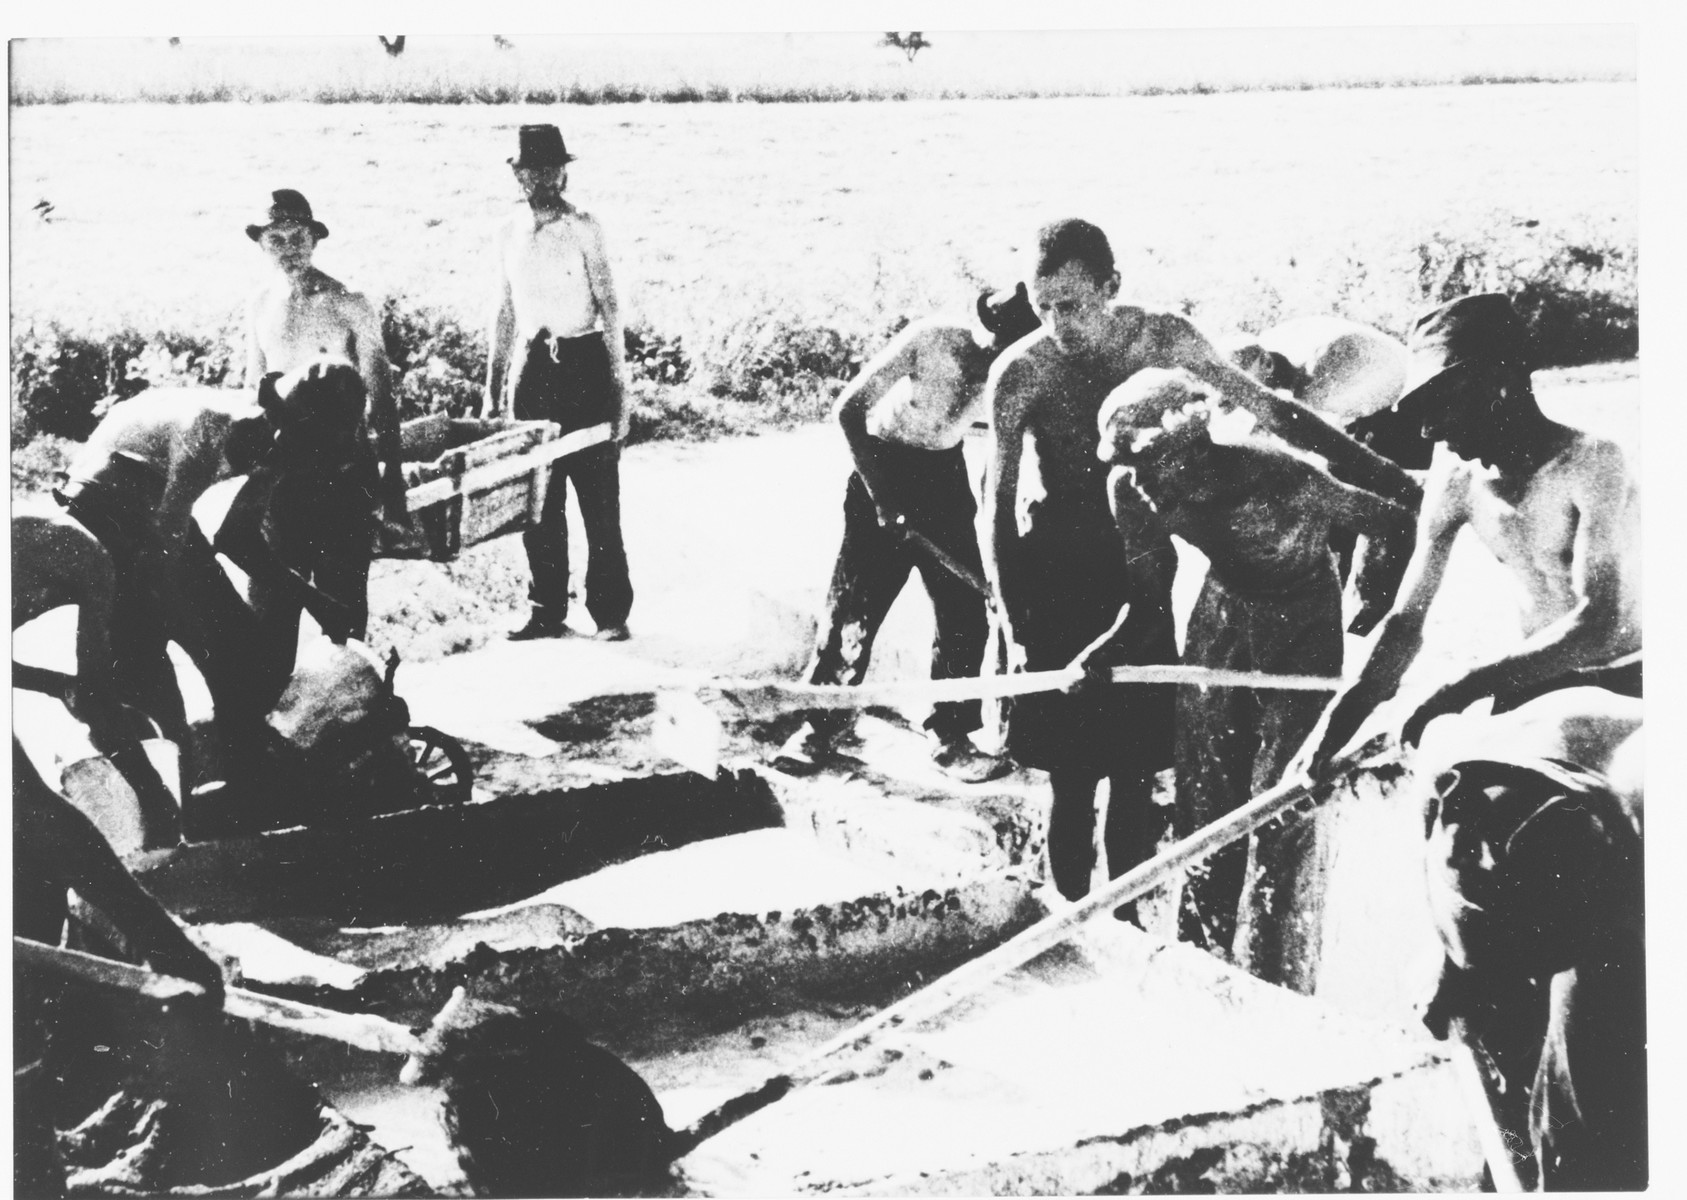 Prisoners at forced labor in the Jasenovac III concentration camp brickyard mixing lime in large troughs.

The photo was displayed in the exhibit, "One Year of Work in Transit Camps," mounted at the Zagreb fair grounds in the fall of 1942.